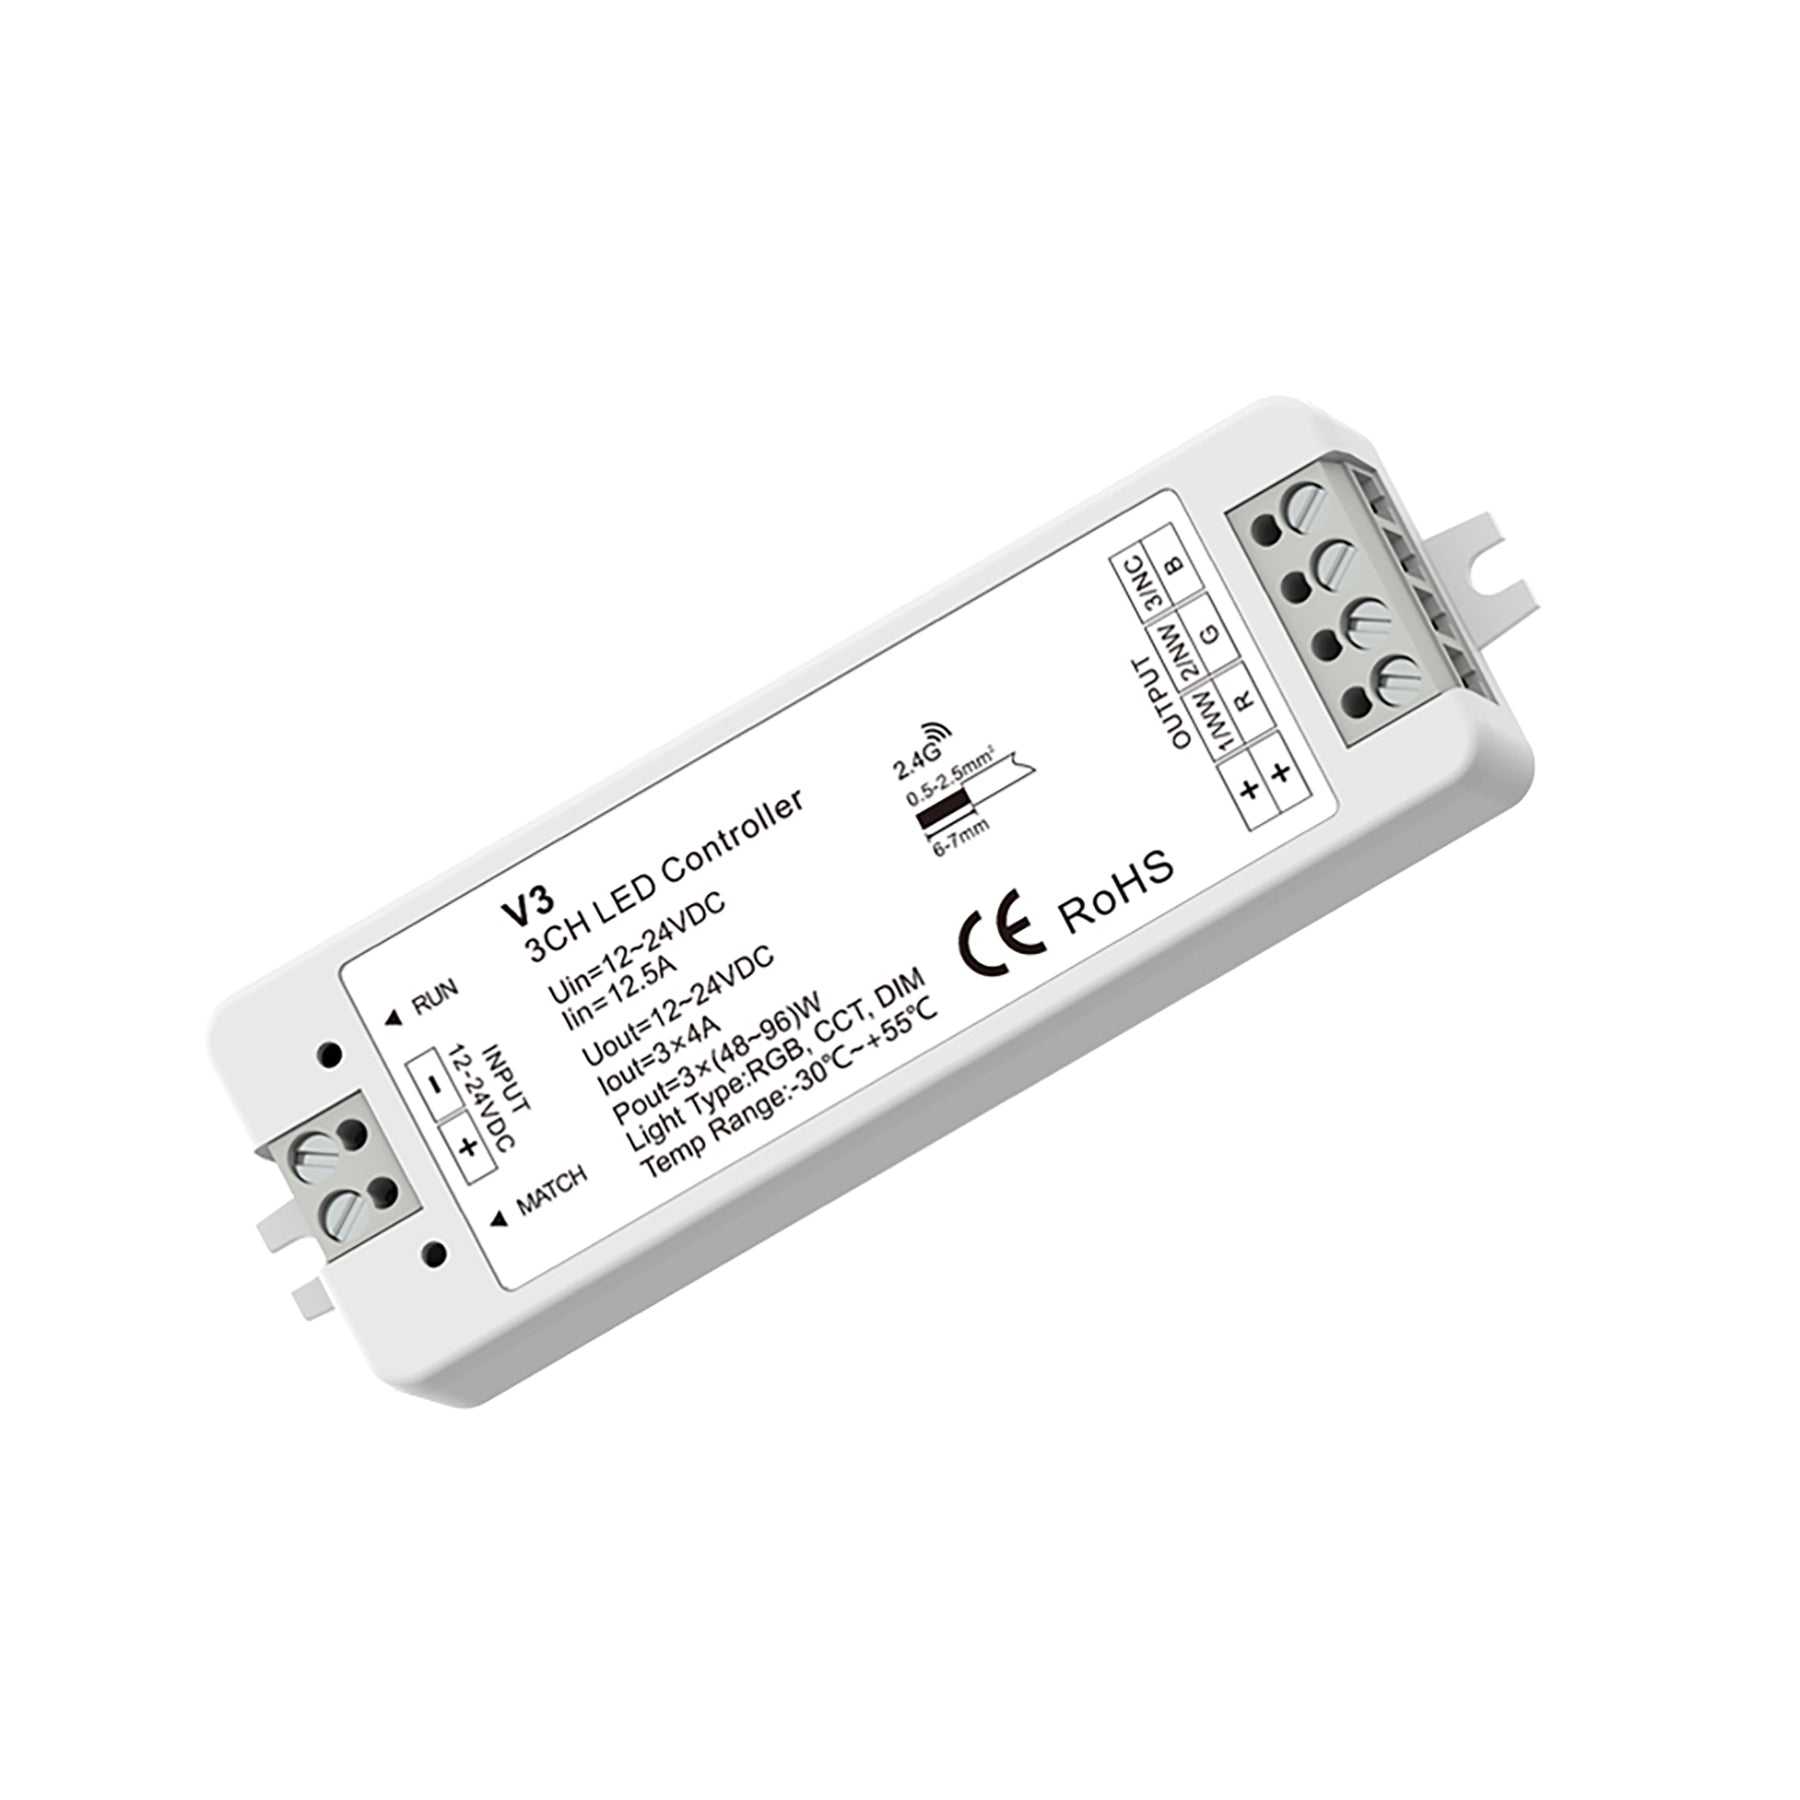 G.W.S. LED LED 12-24V DC RGB/RGBW Controller V3 + 4 Zone Panel Remote Control 2*AAA Battery T24